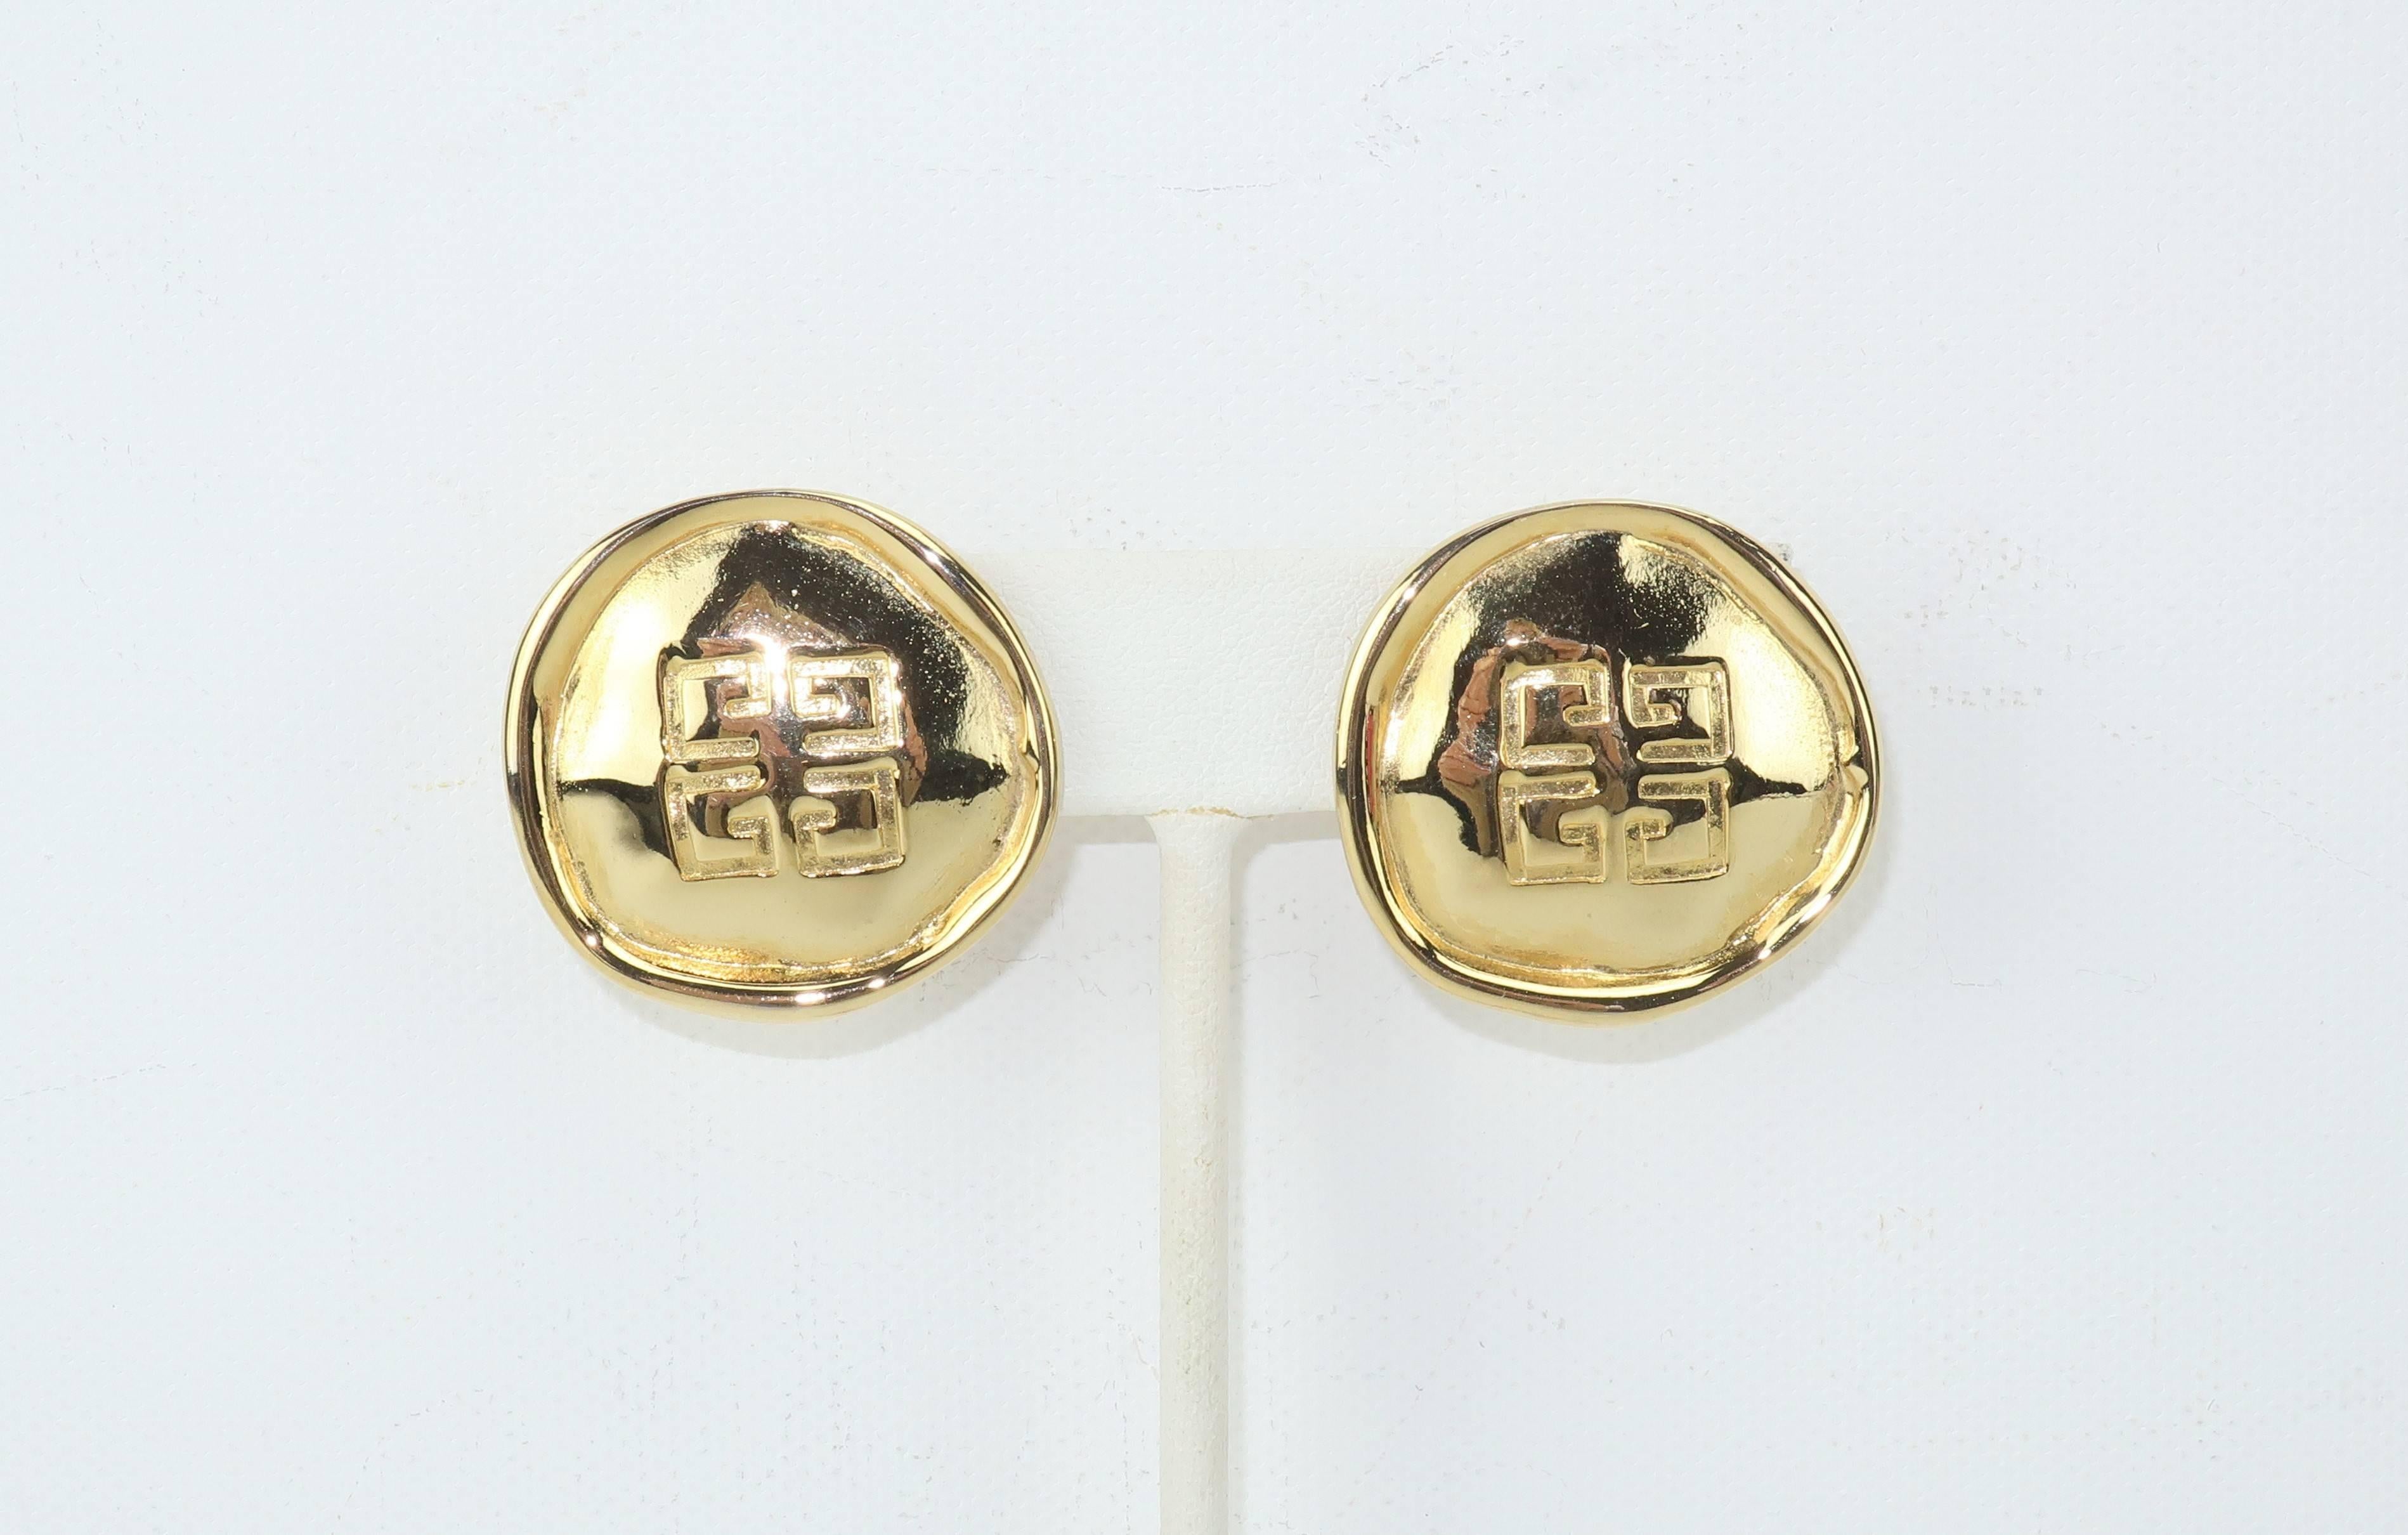 Much like his lovely clothing designs, Hubert de Givenchy created elegant and feminine costume jewelry starting in the 1950's and throughout his career.  These 1980's gold tone metal earrings have a hand hammered look in a button shape.  Each